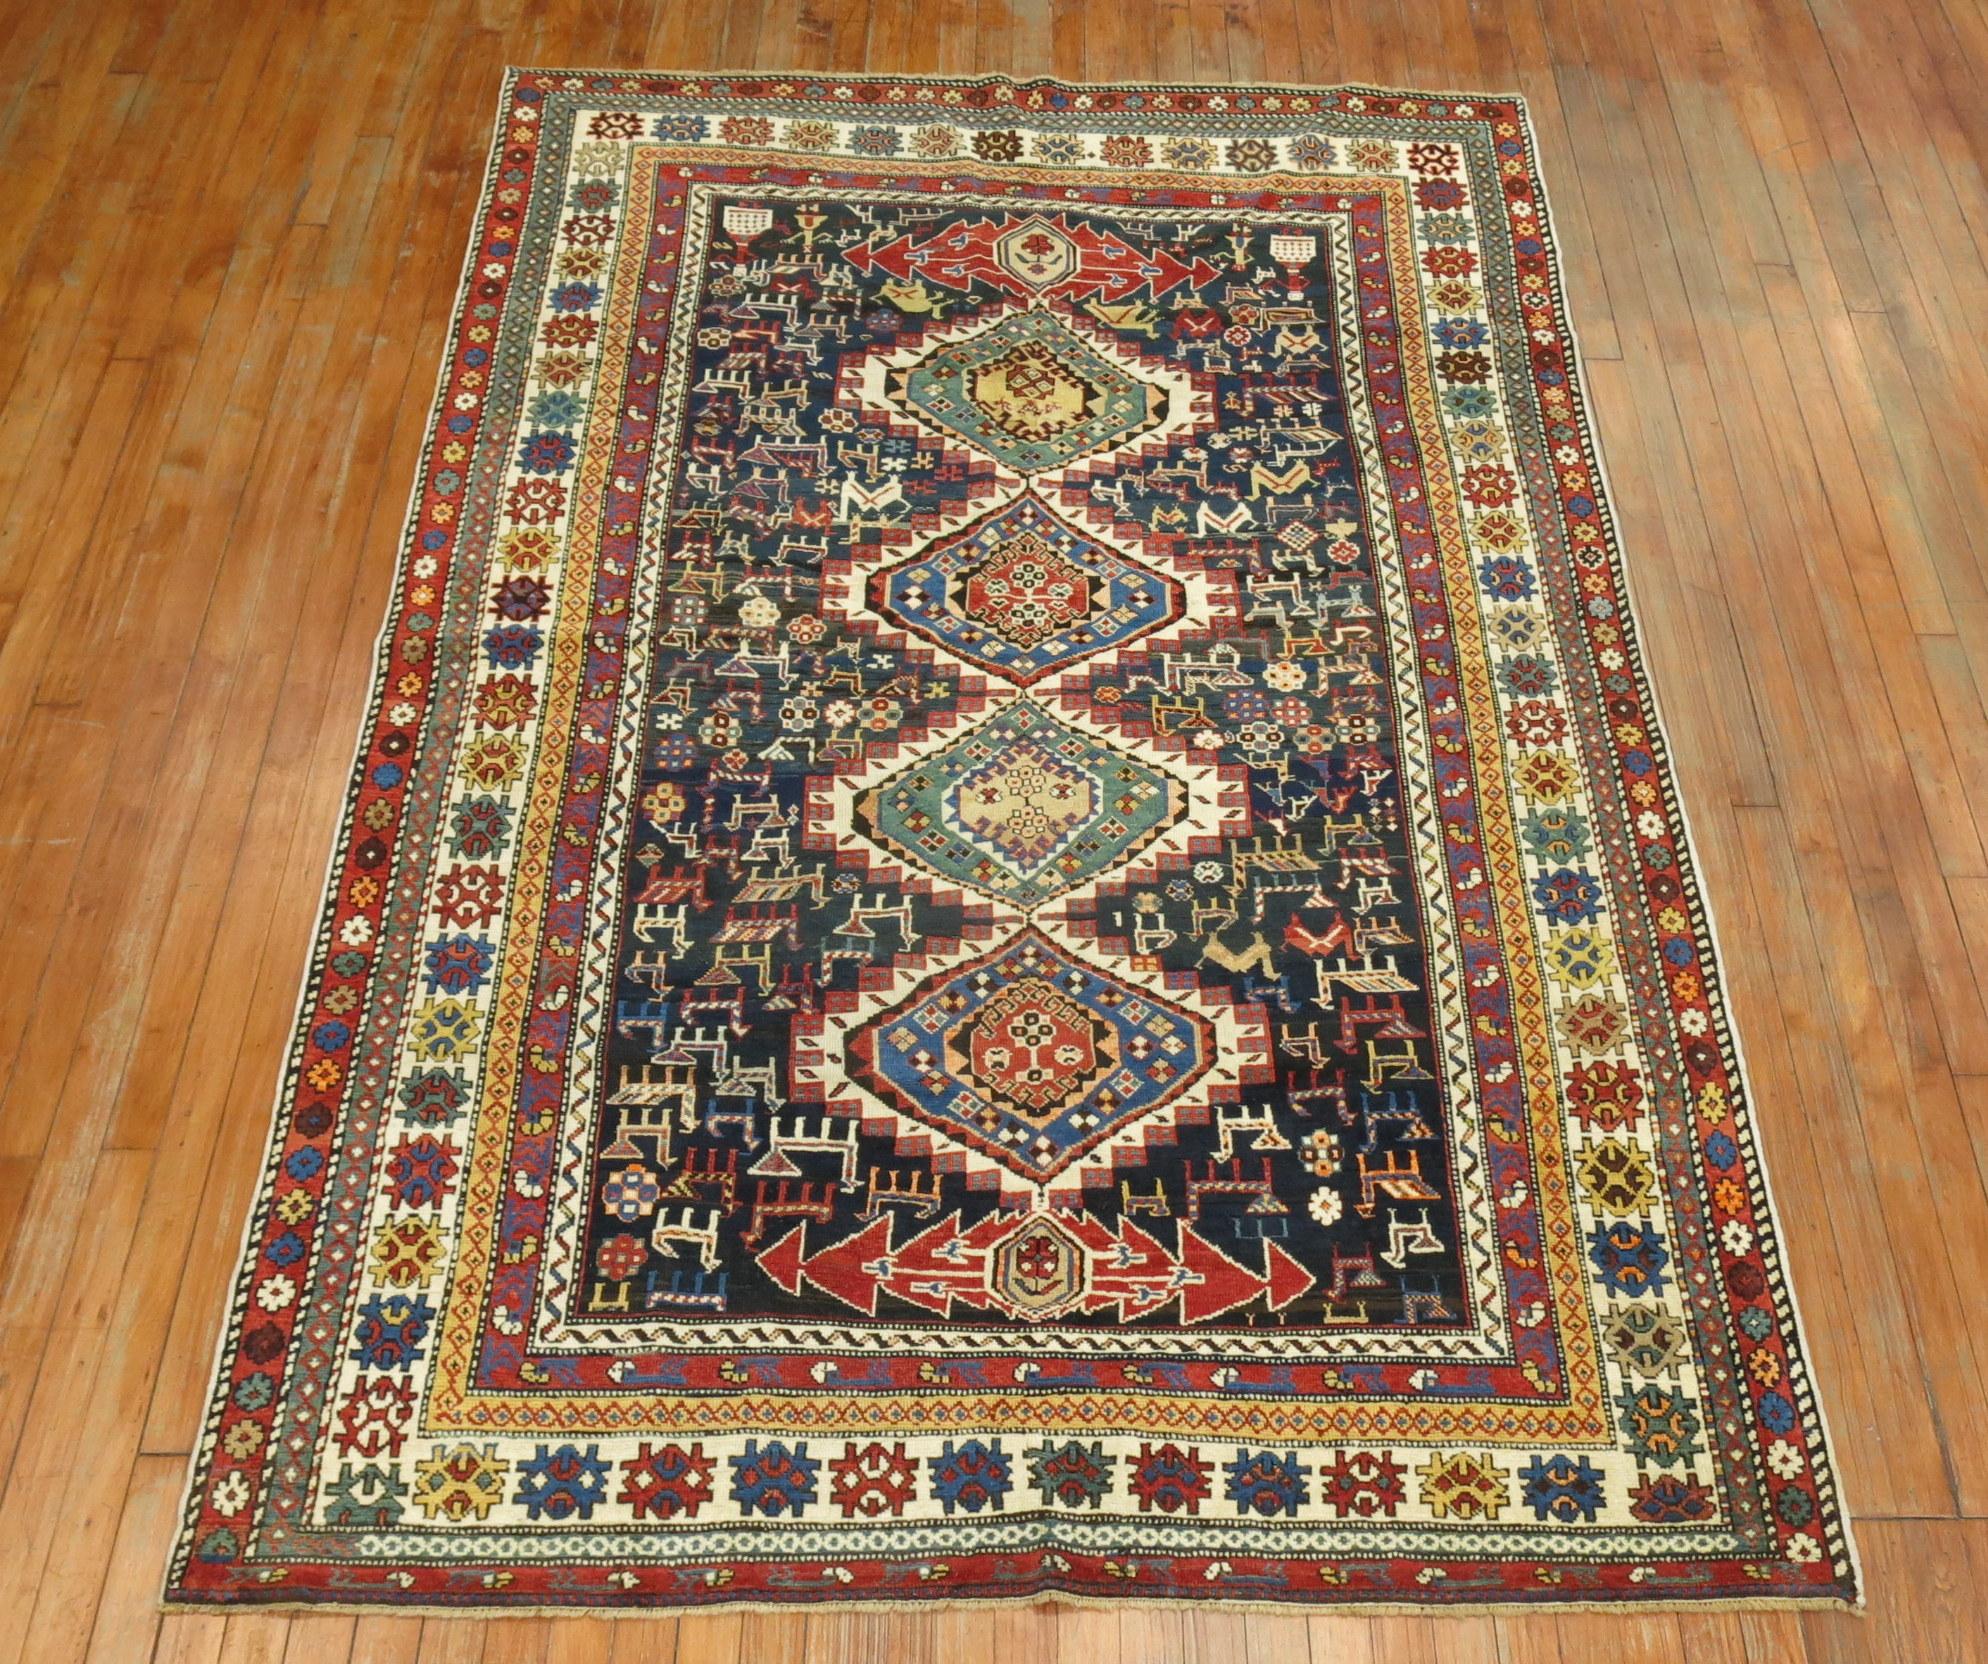 A colorful antique Shirvan rug woven in the Caucasian mountainous region. Running birds running through medium blue ground with 2 green and 2 blue geometric medallions surrounded by multiple borders.